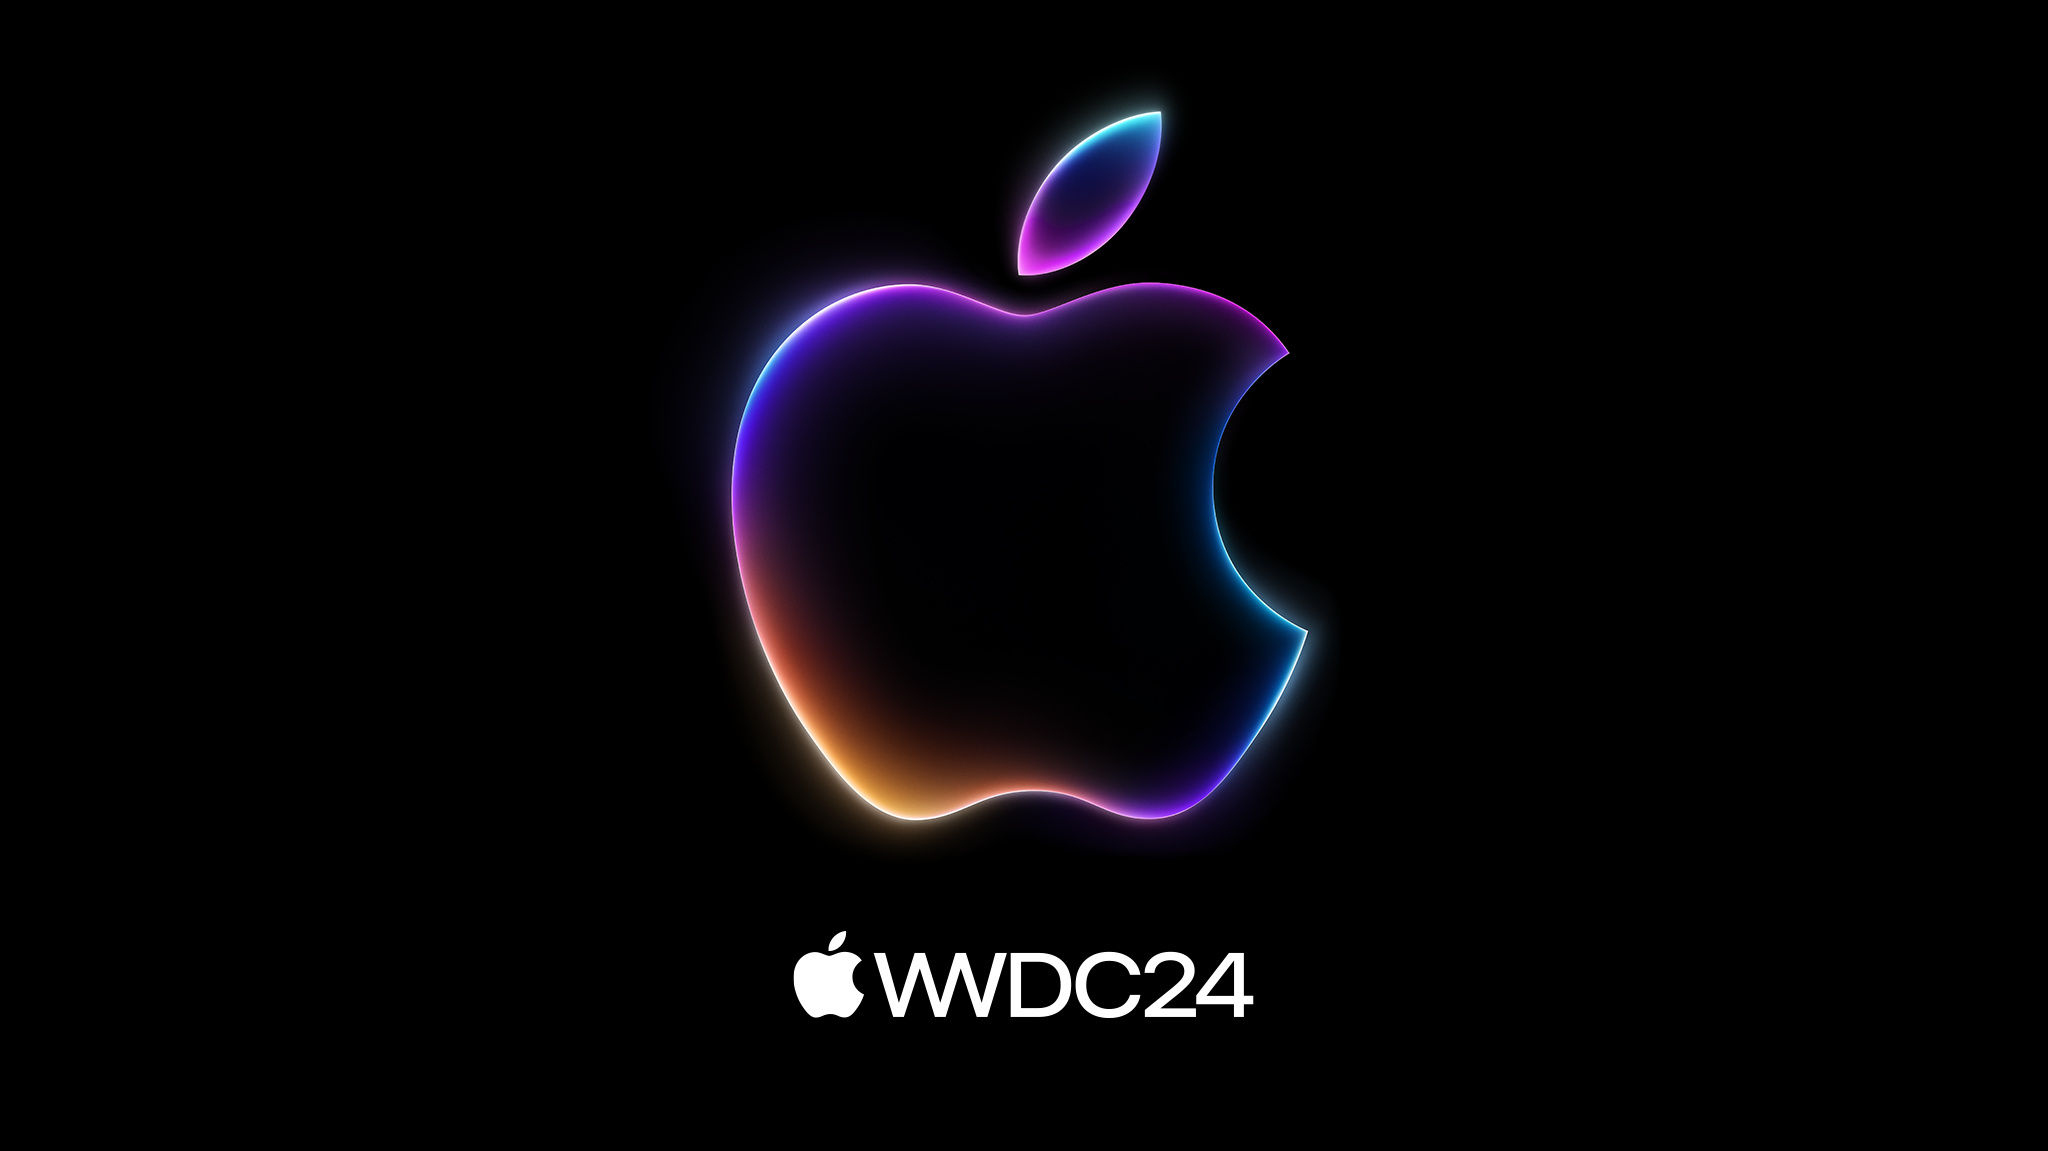 The phrase “WWDC24” is shown in a glowing gradient of red, purple, and blue on a black background.